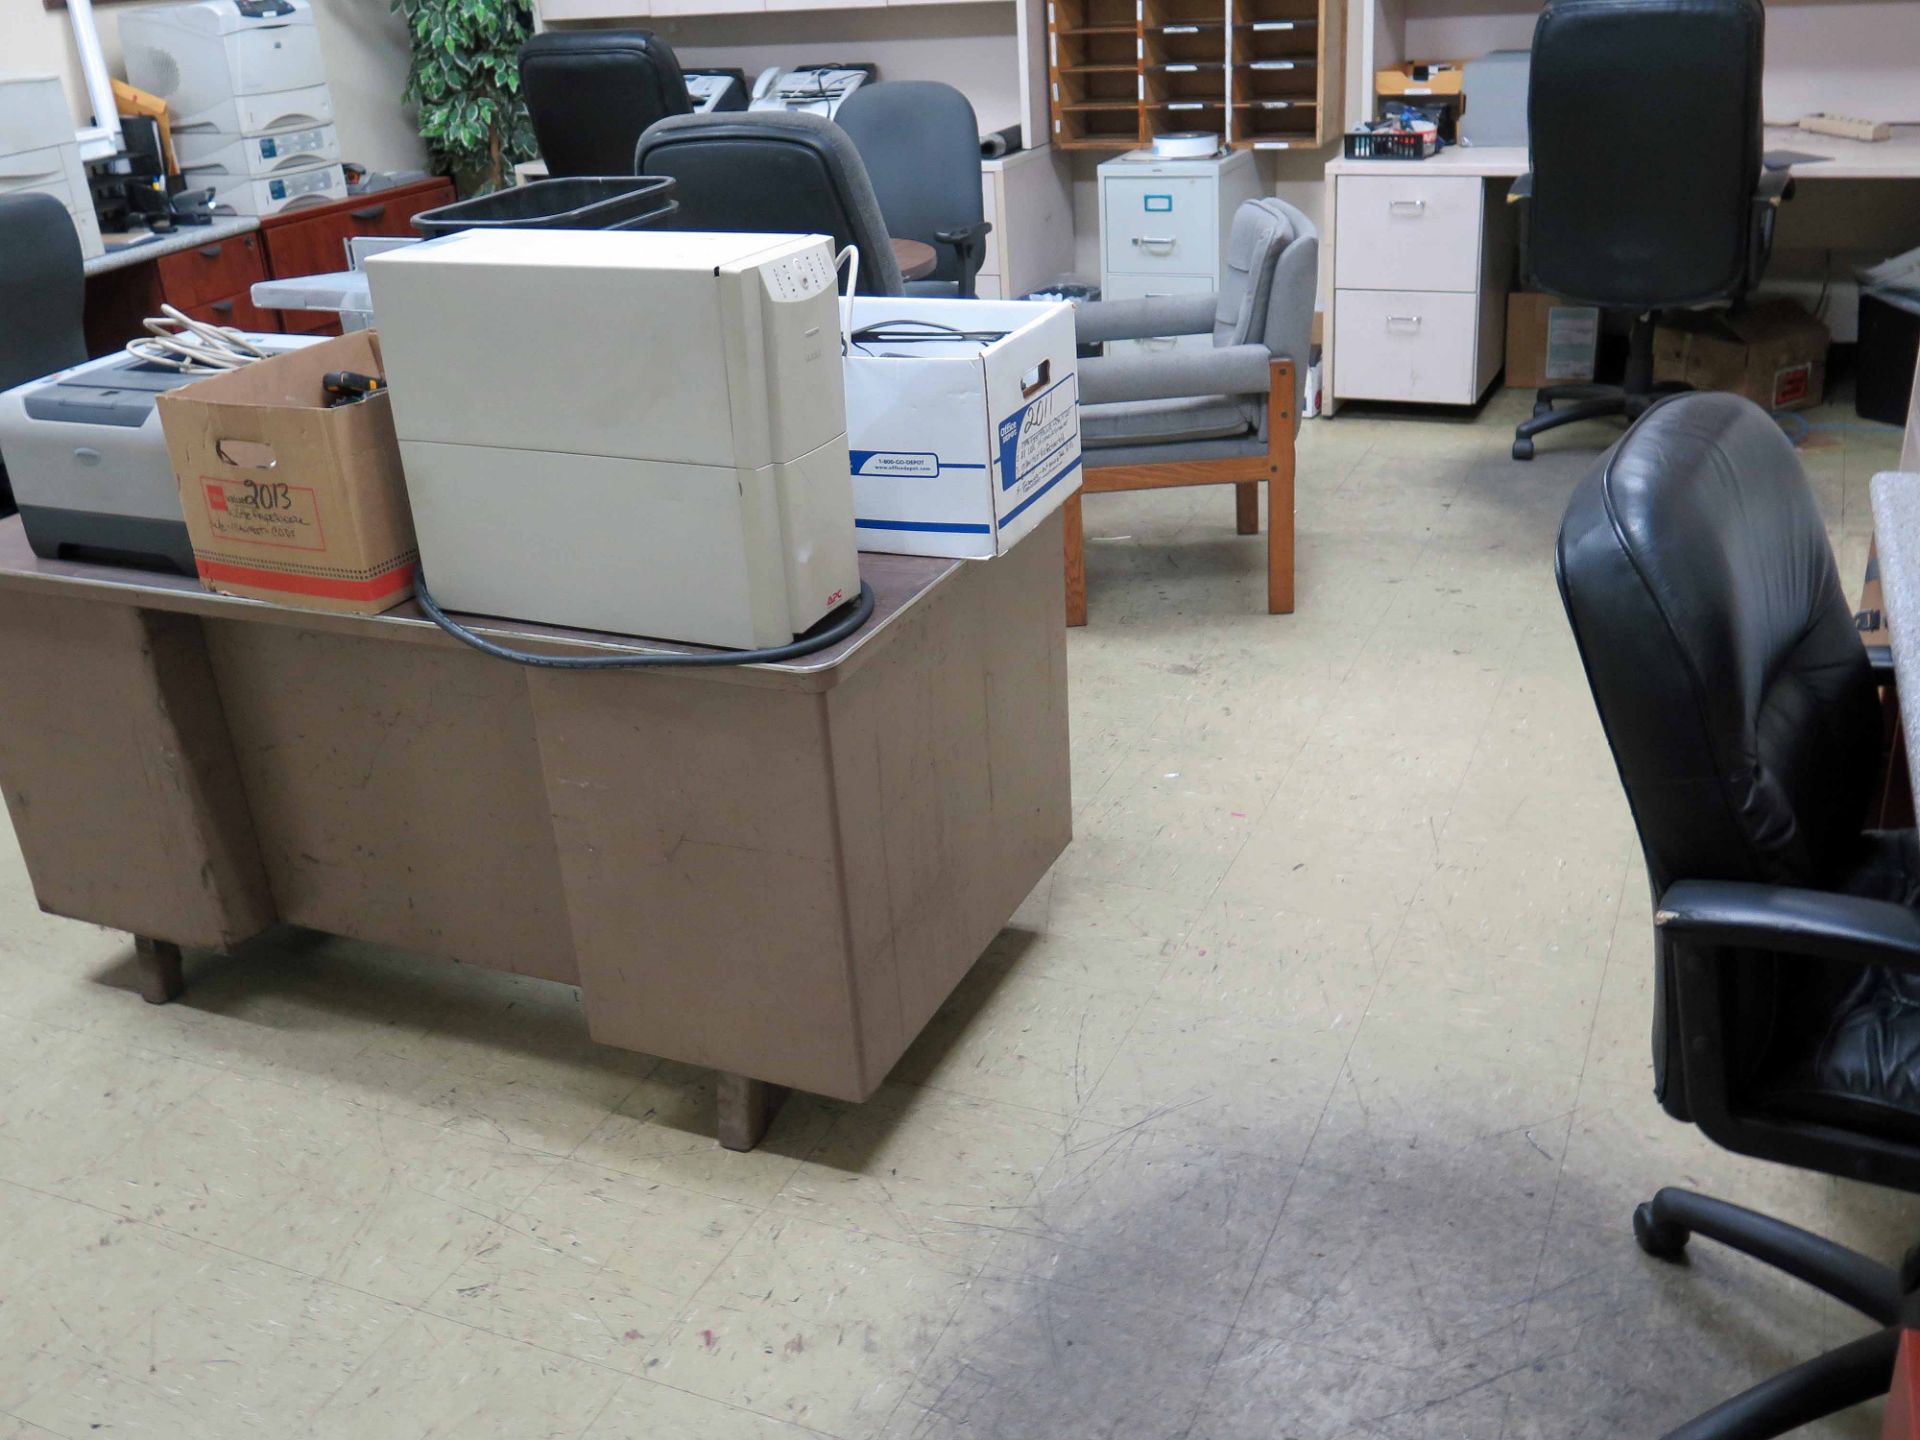 DISPATCH OFFICE, w/printers, filing cabinets, office furniture, metro rack - Image 16 of 16